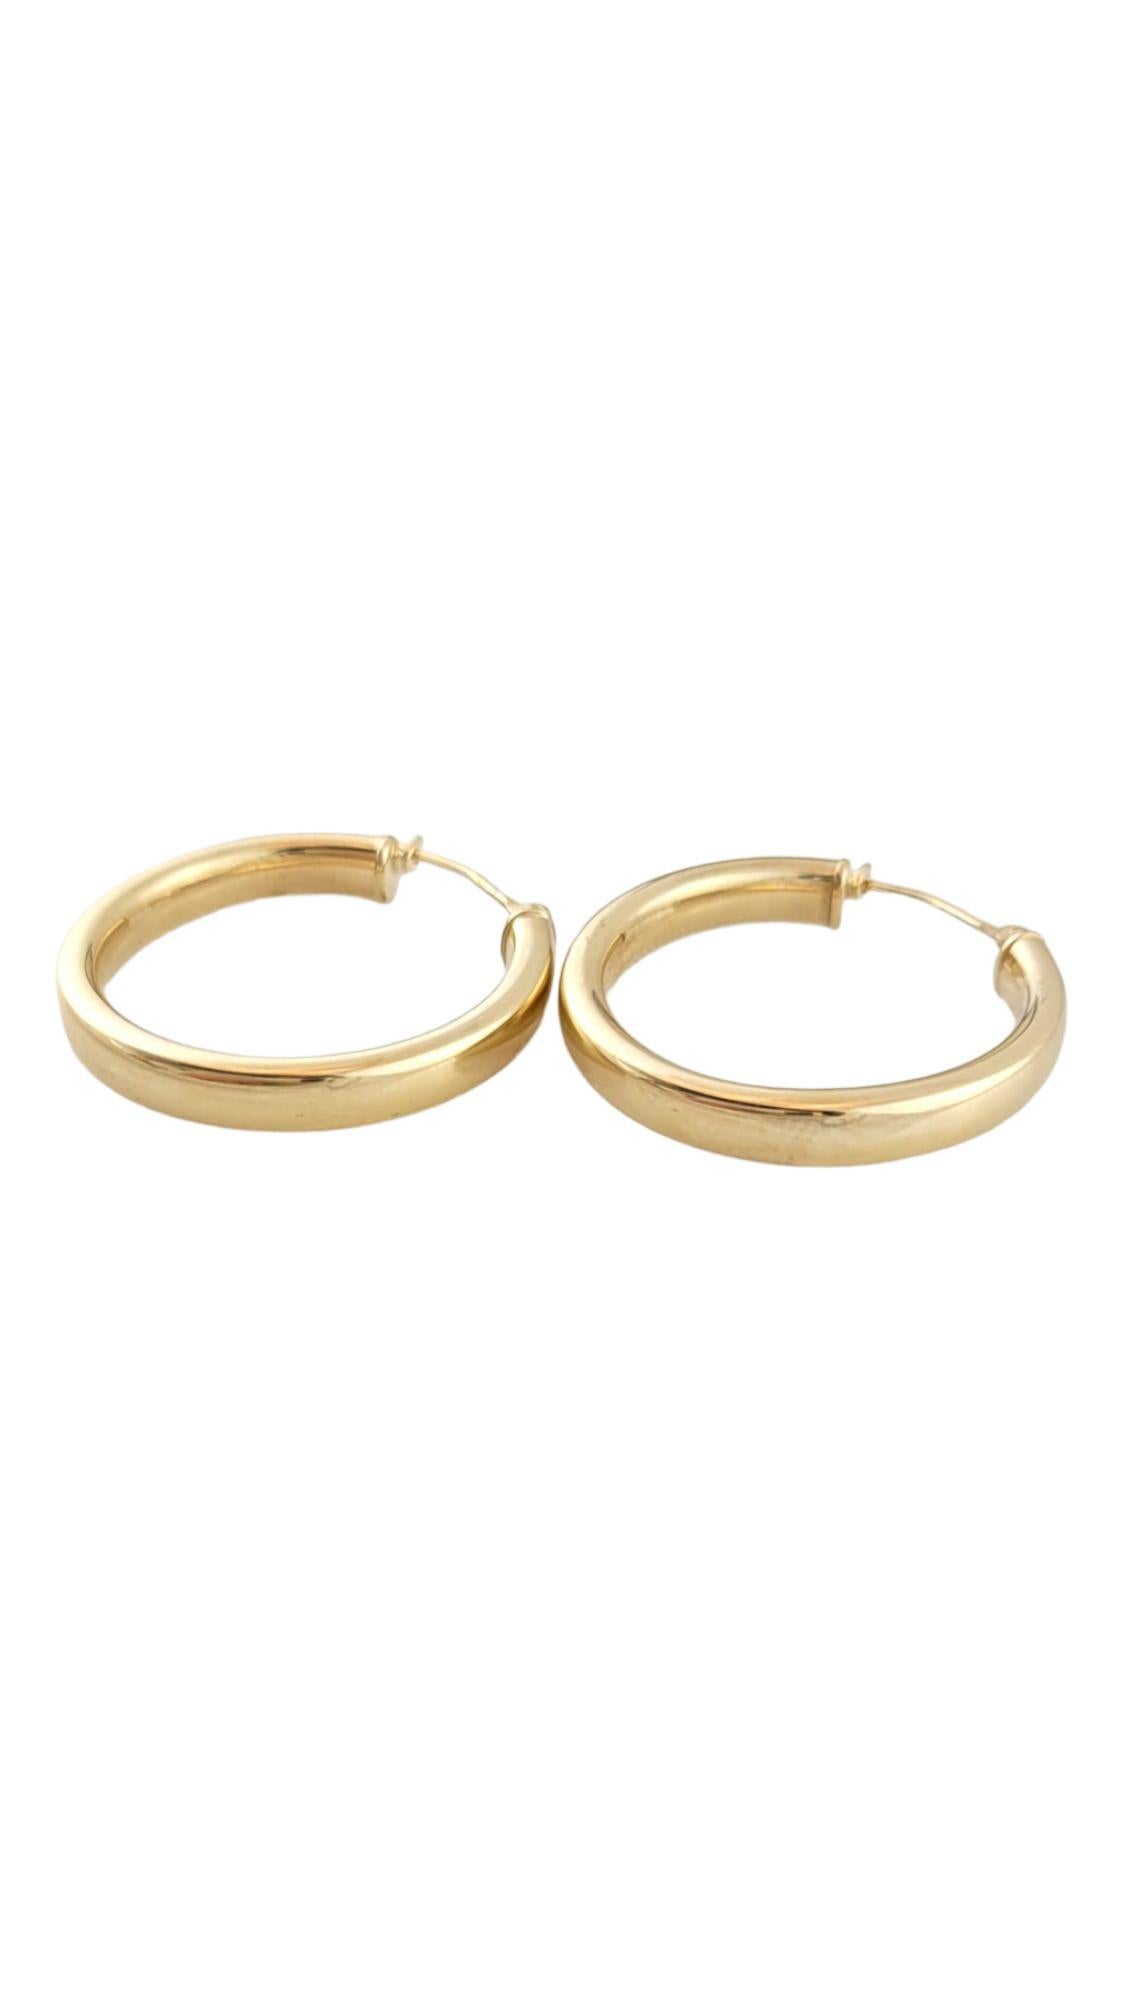 Classic set of gorgeous 14K gold hoop earrings!

Size: 25.4mm X 25.4mm X 3.8mm

Weight: 1.71 g/ 1.1 dwt

Hallmark: 14K JCU

Very good condition, professionally polished.

Will come packaged in a gift box or pouch (when possible) and will be shipped